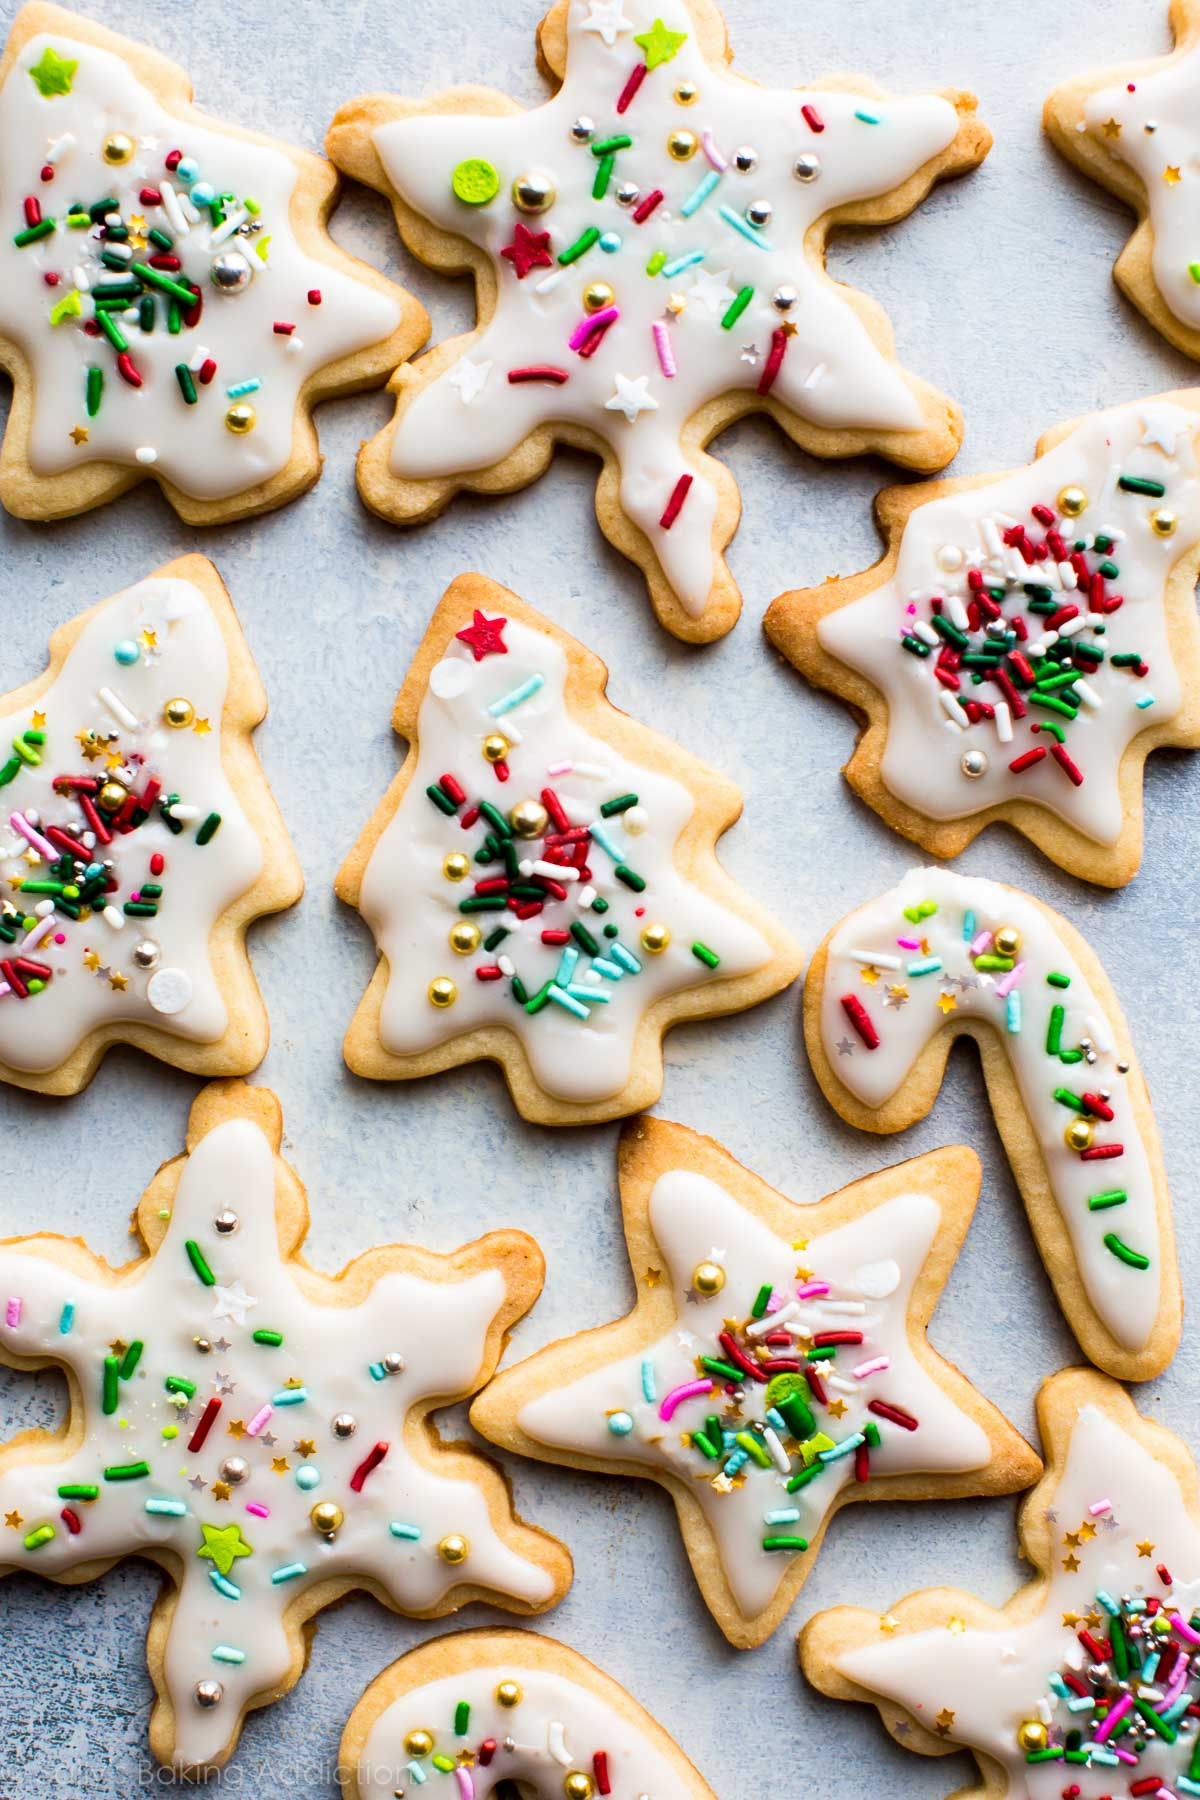 Soft Christmas Cut Out Cookies
 Holiday Cut Out Sugar Cookies with Easy Icing Sallys